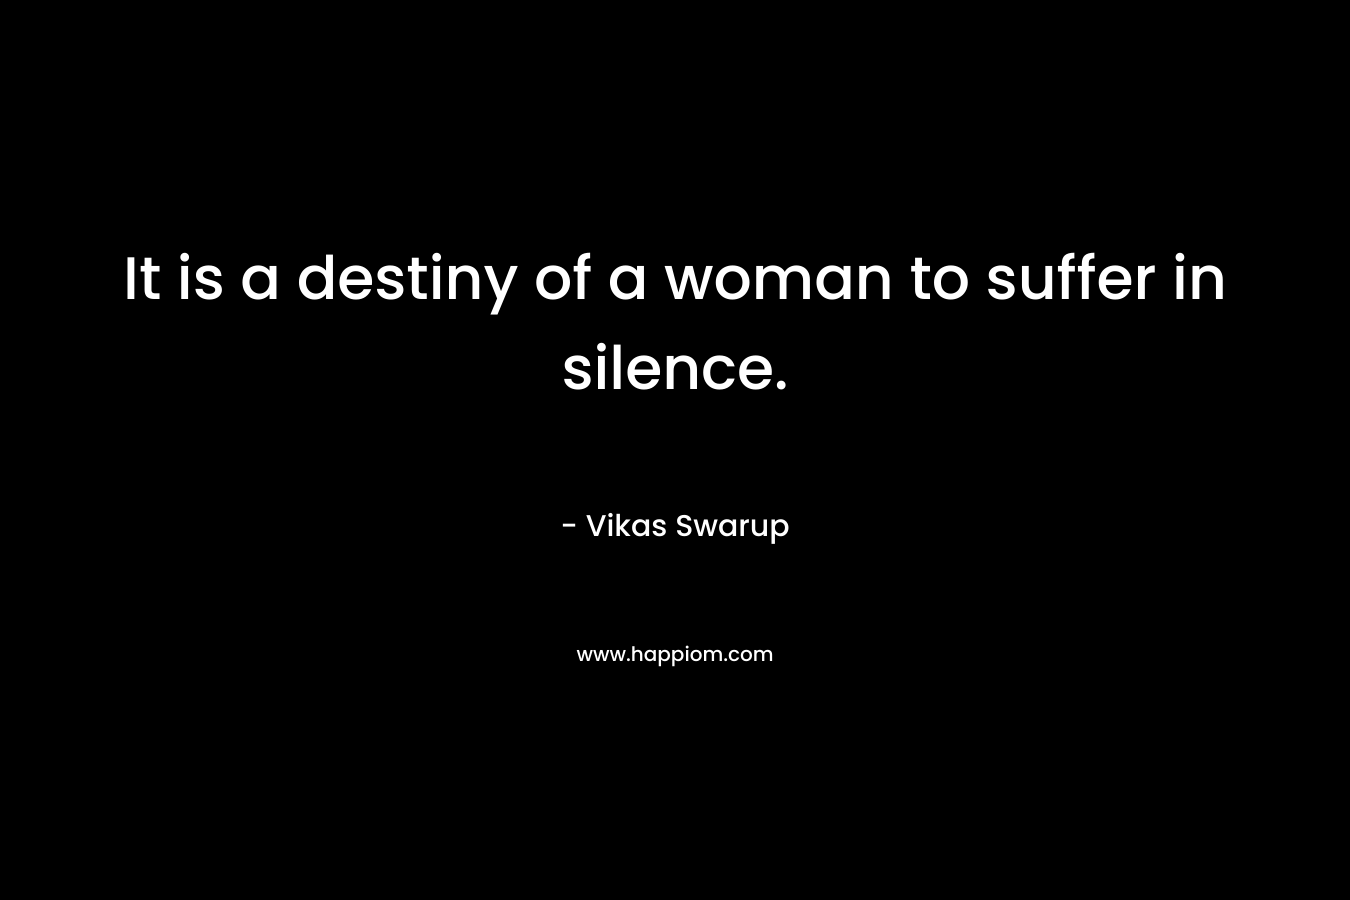 It is a destiny of a woman to suffer in silence.